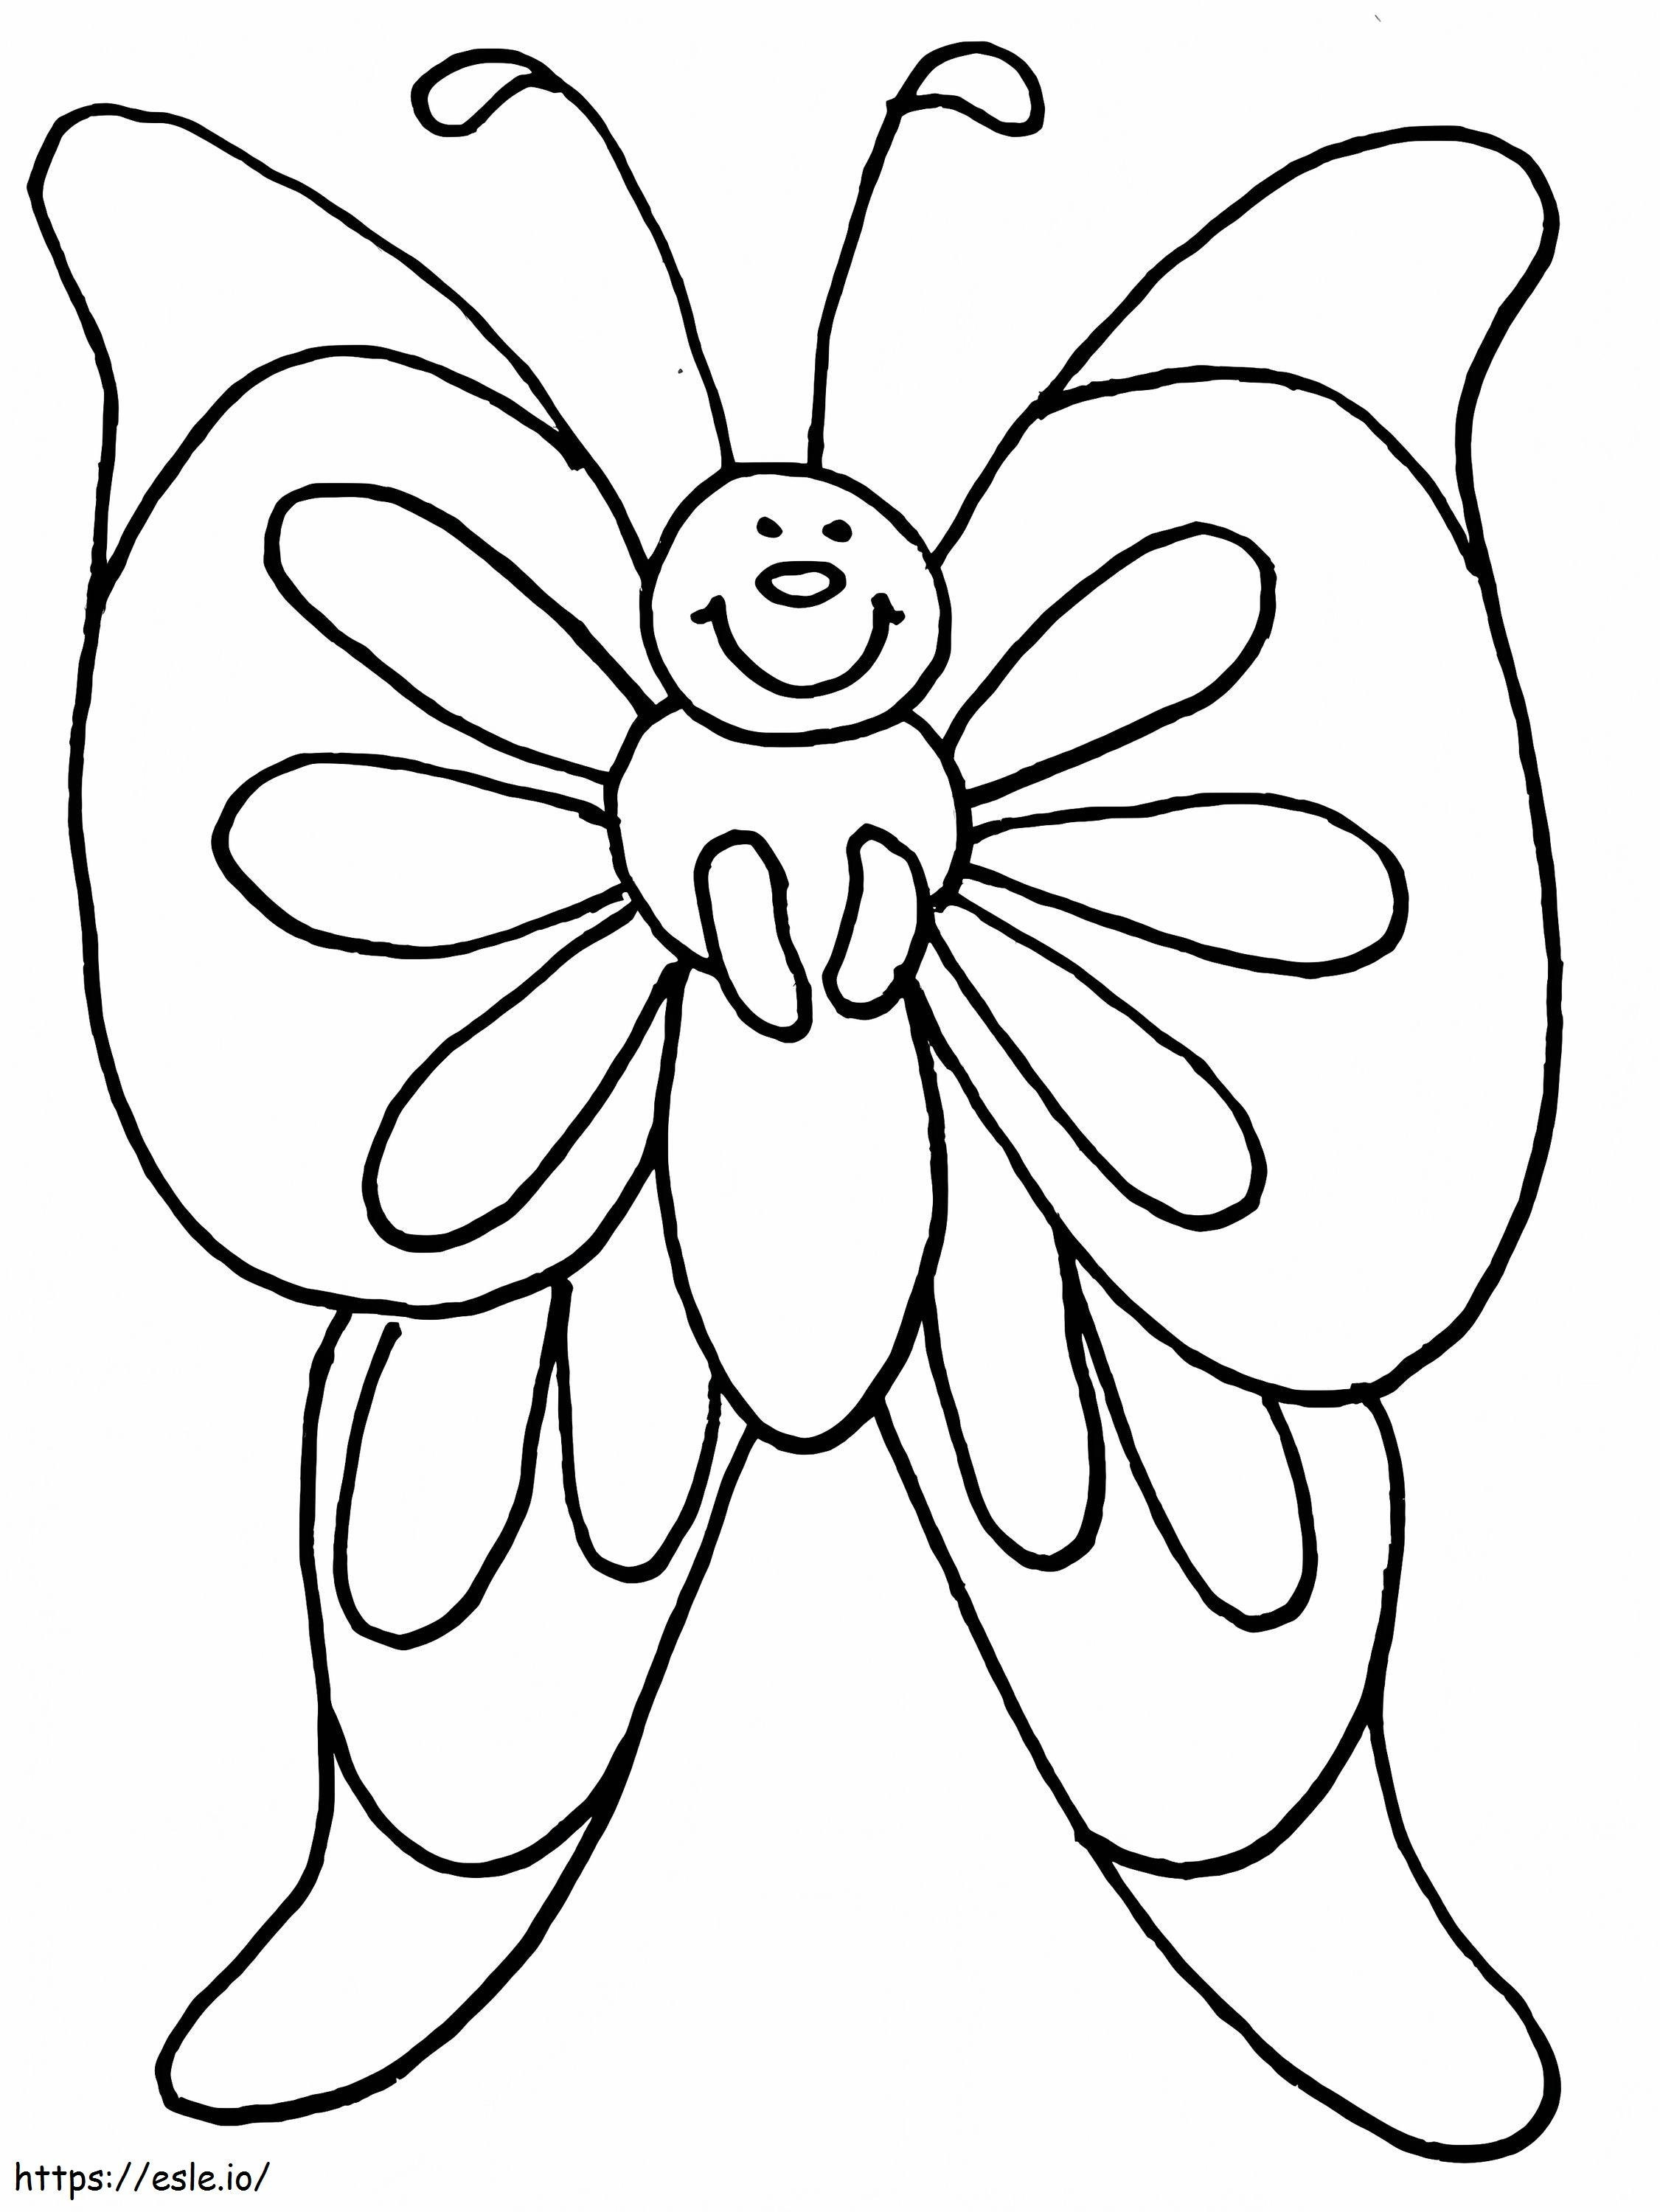 The Butterfly Is Happy coloring page